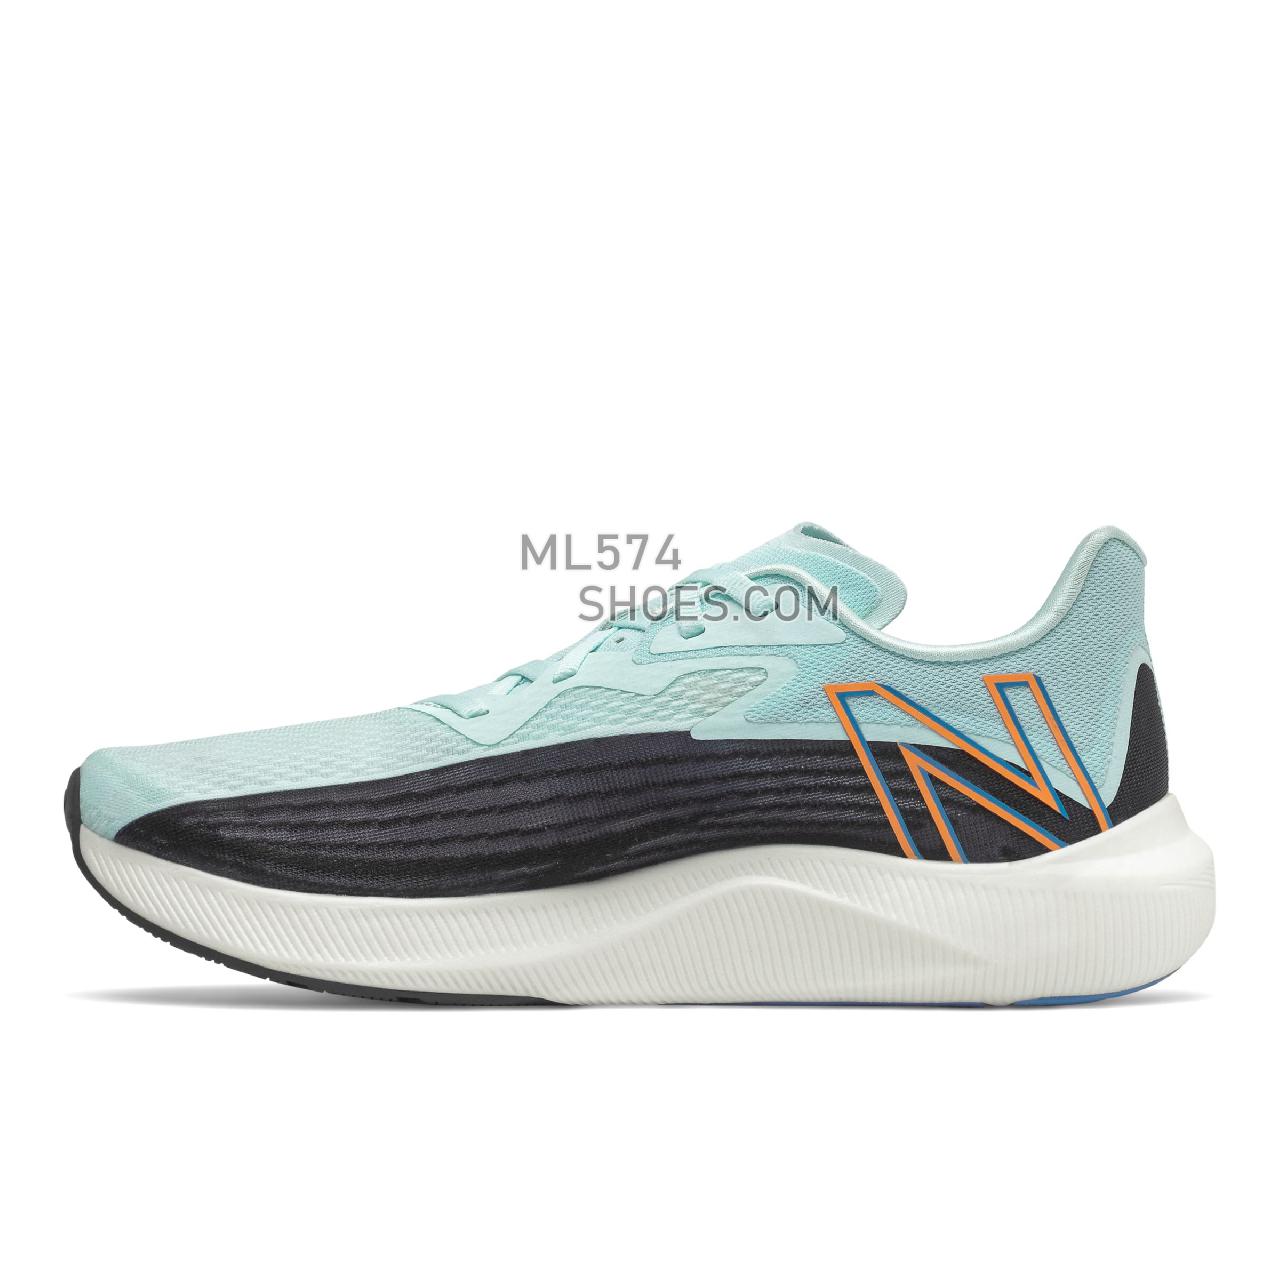 New Balance FuelCell Rebel v2 - Men's Neutral Running - Black with Pale Blue Chill - MFCXCB2